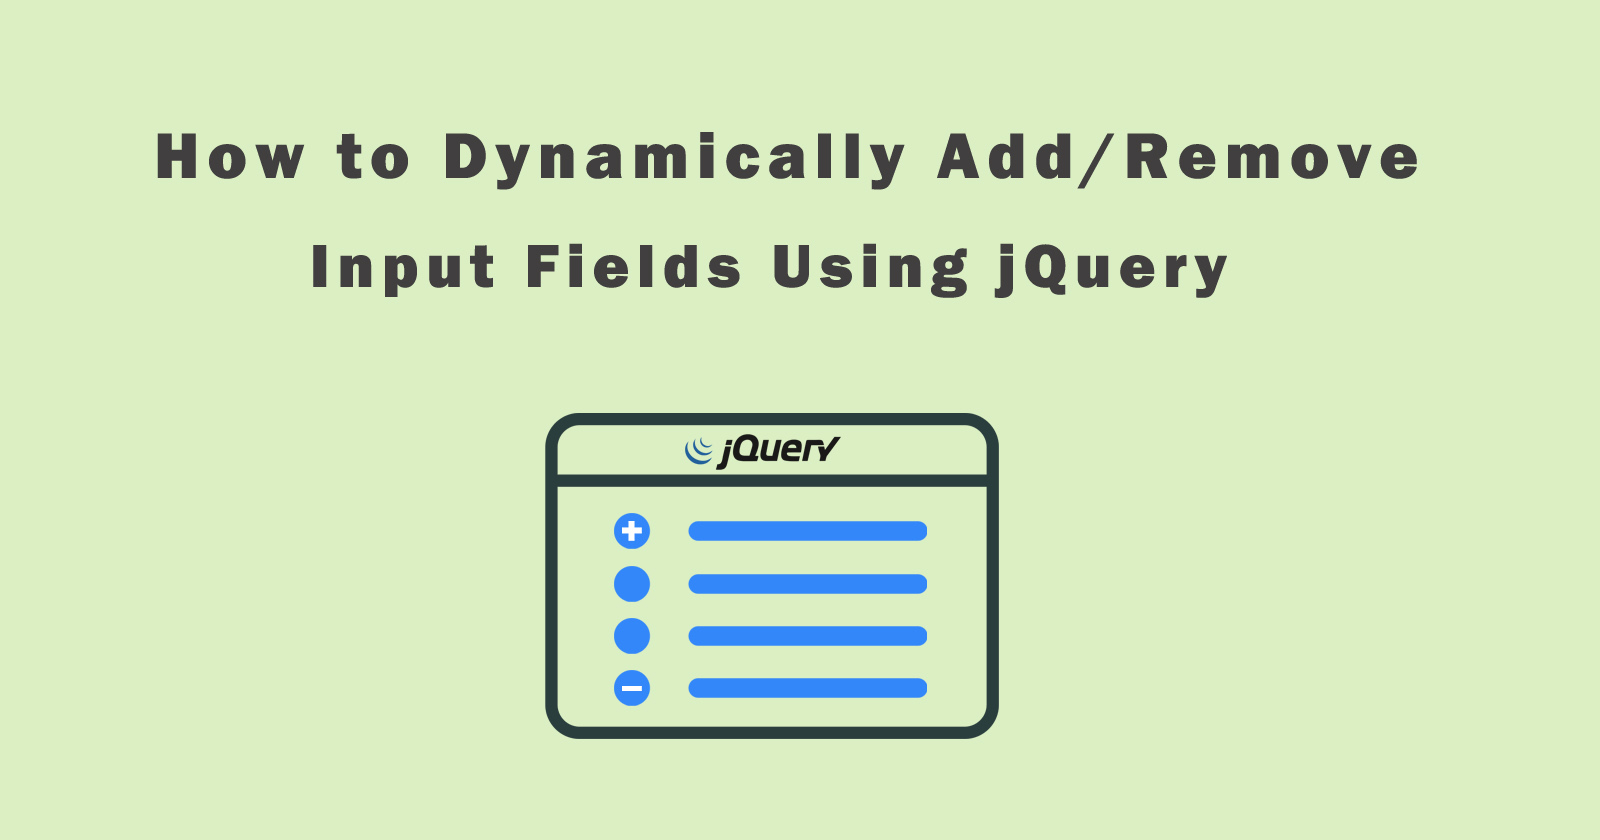 How to Add/Remove Input Fields Dynamically Using jQuery?